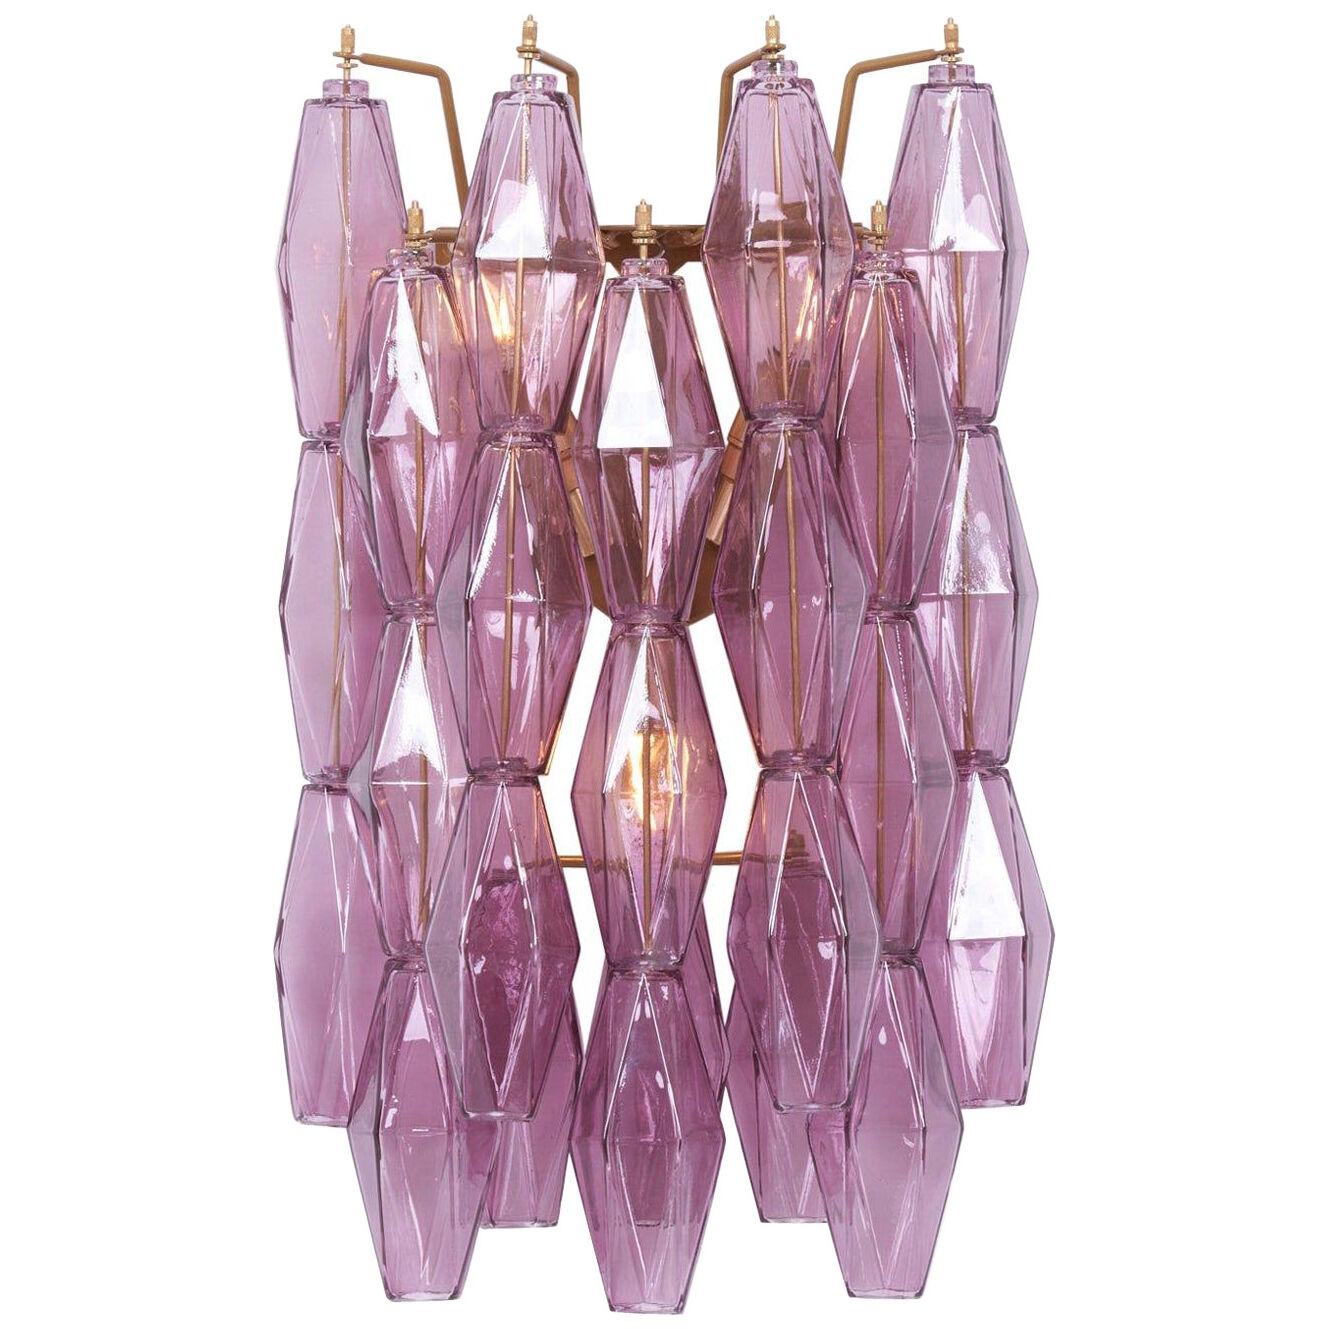 1 of 2 Amethyst Polyhedral Glass Sconces or Wall Lamps